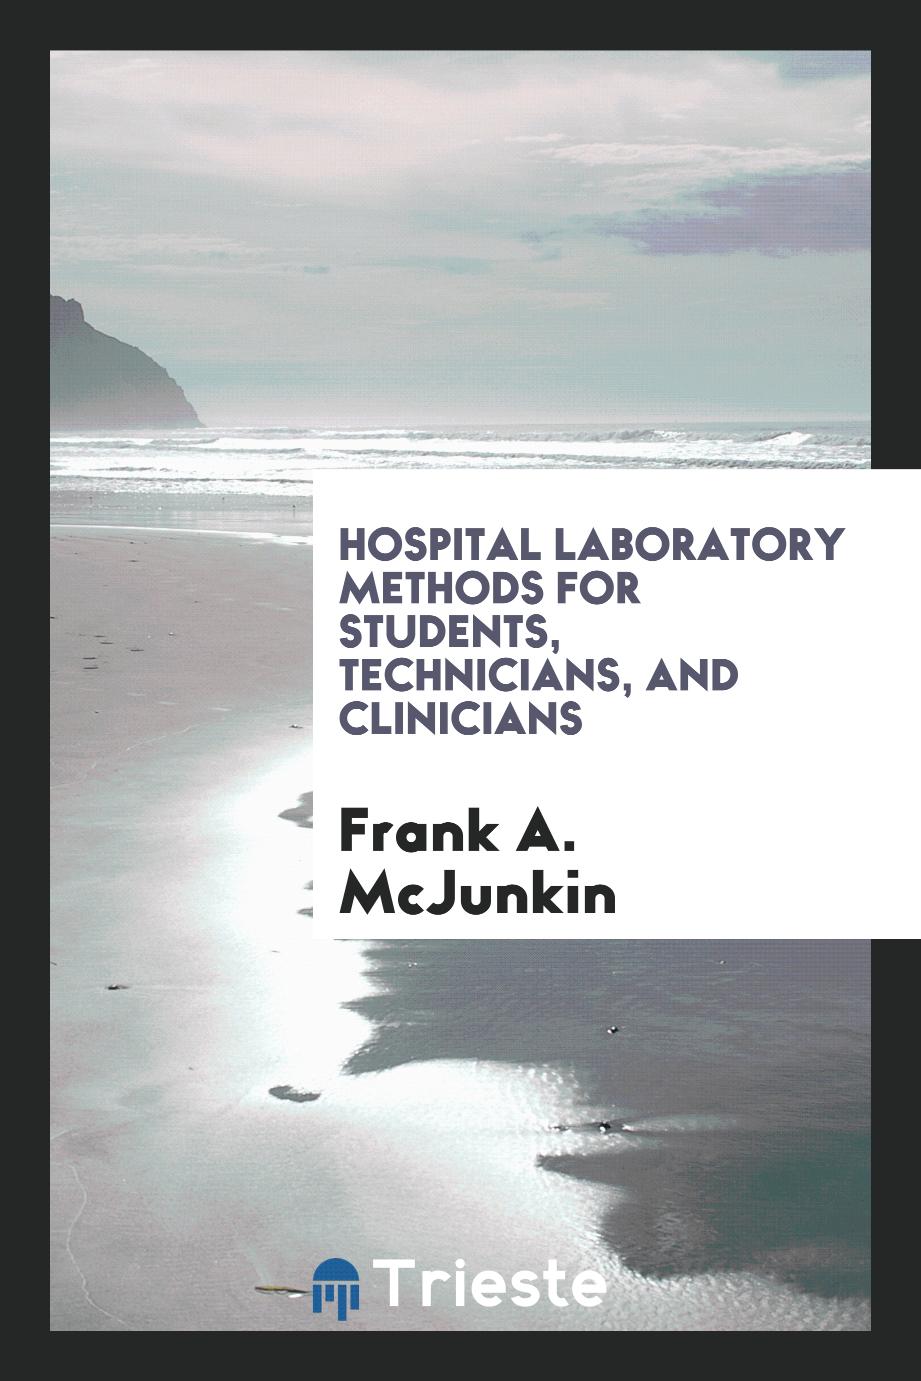 Hospital Laboratory Methods for Students, Technicians, and Clinicians